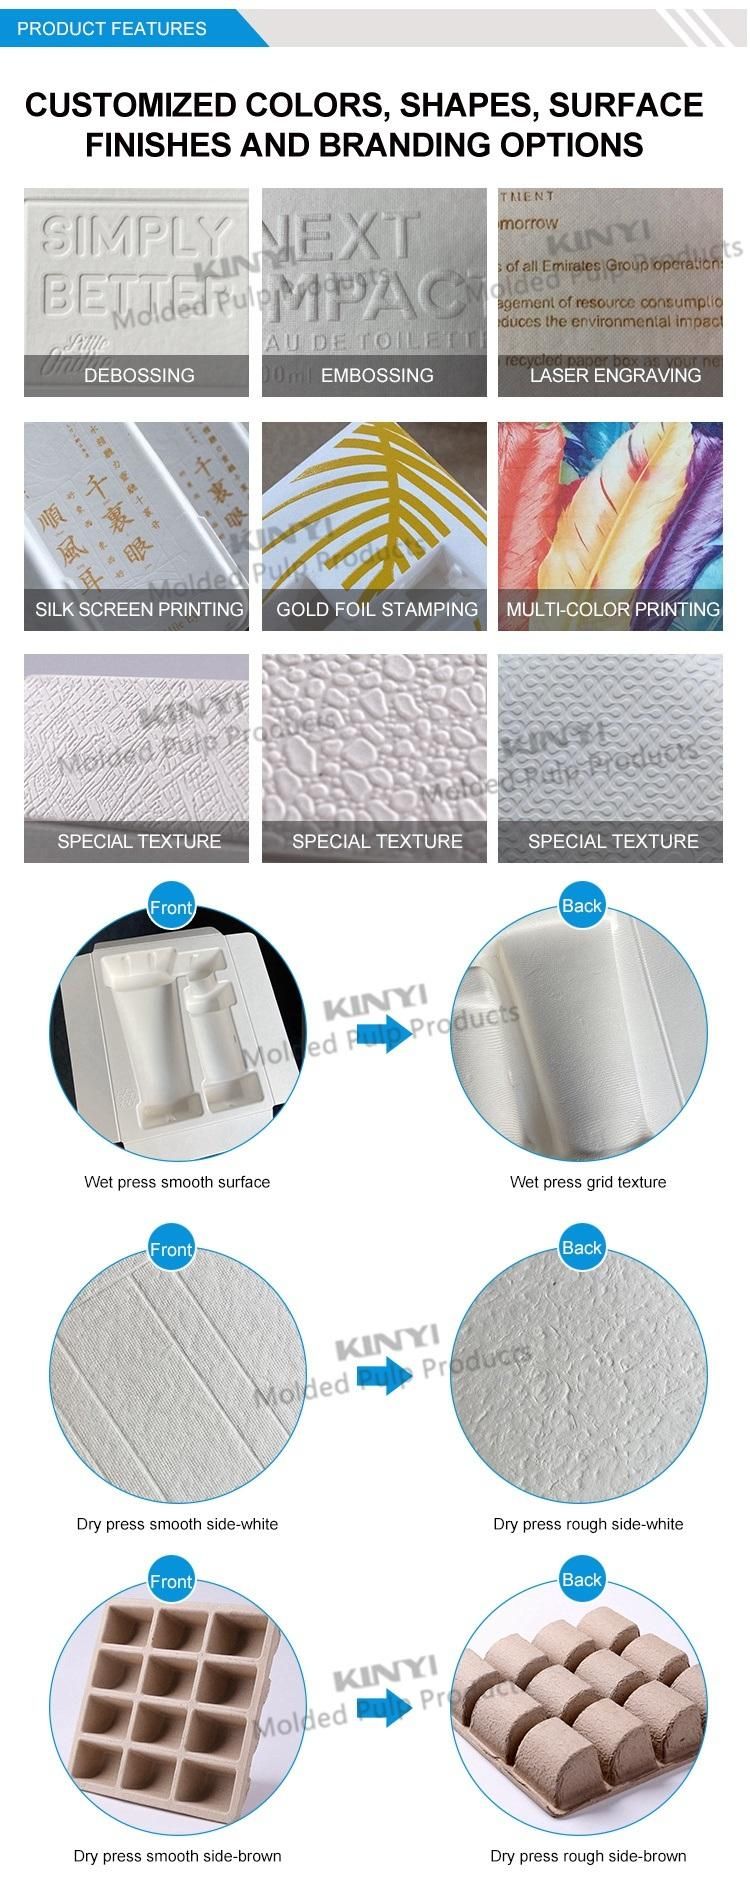 Biodegradable Pulp Paper Molded Custom Toothbrush Packaging Box